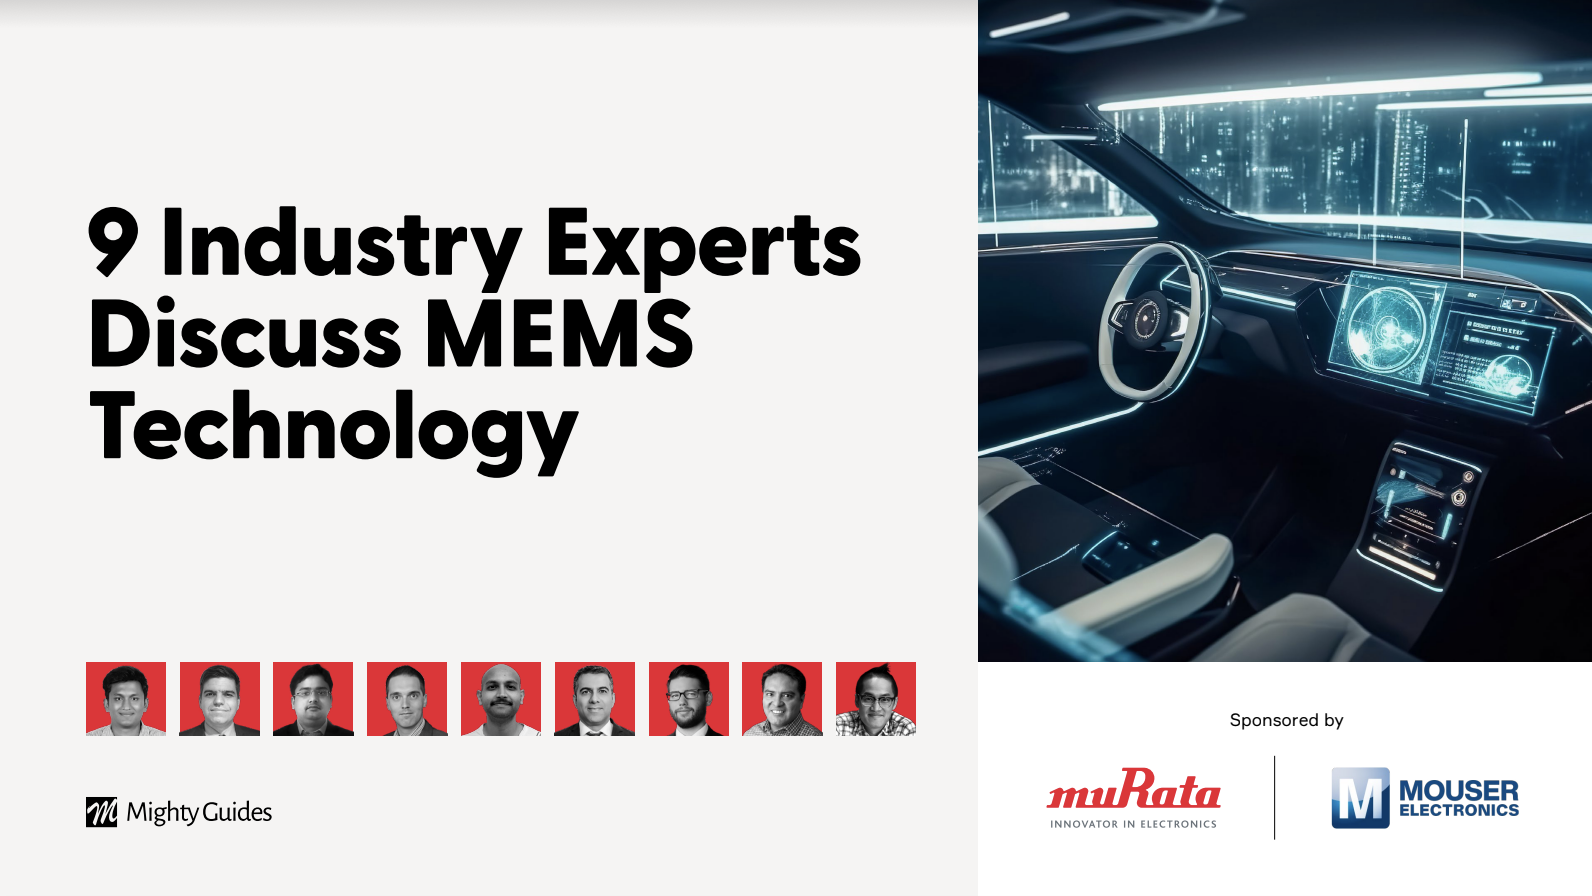 Murata and Mouser Electronics: 9 Industry Experts Discuss MEMS Technology